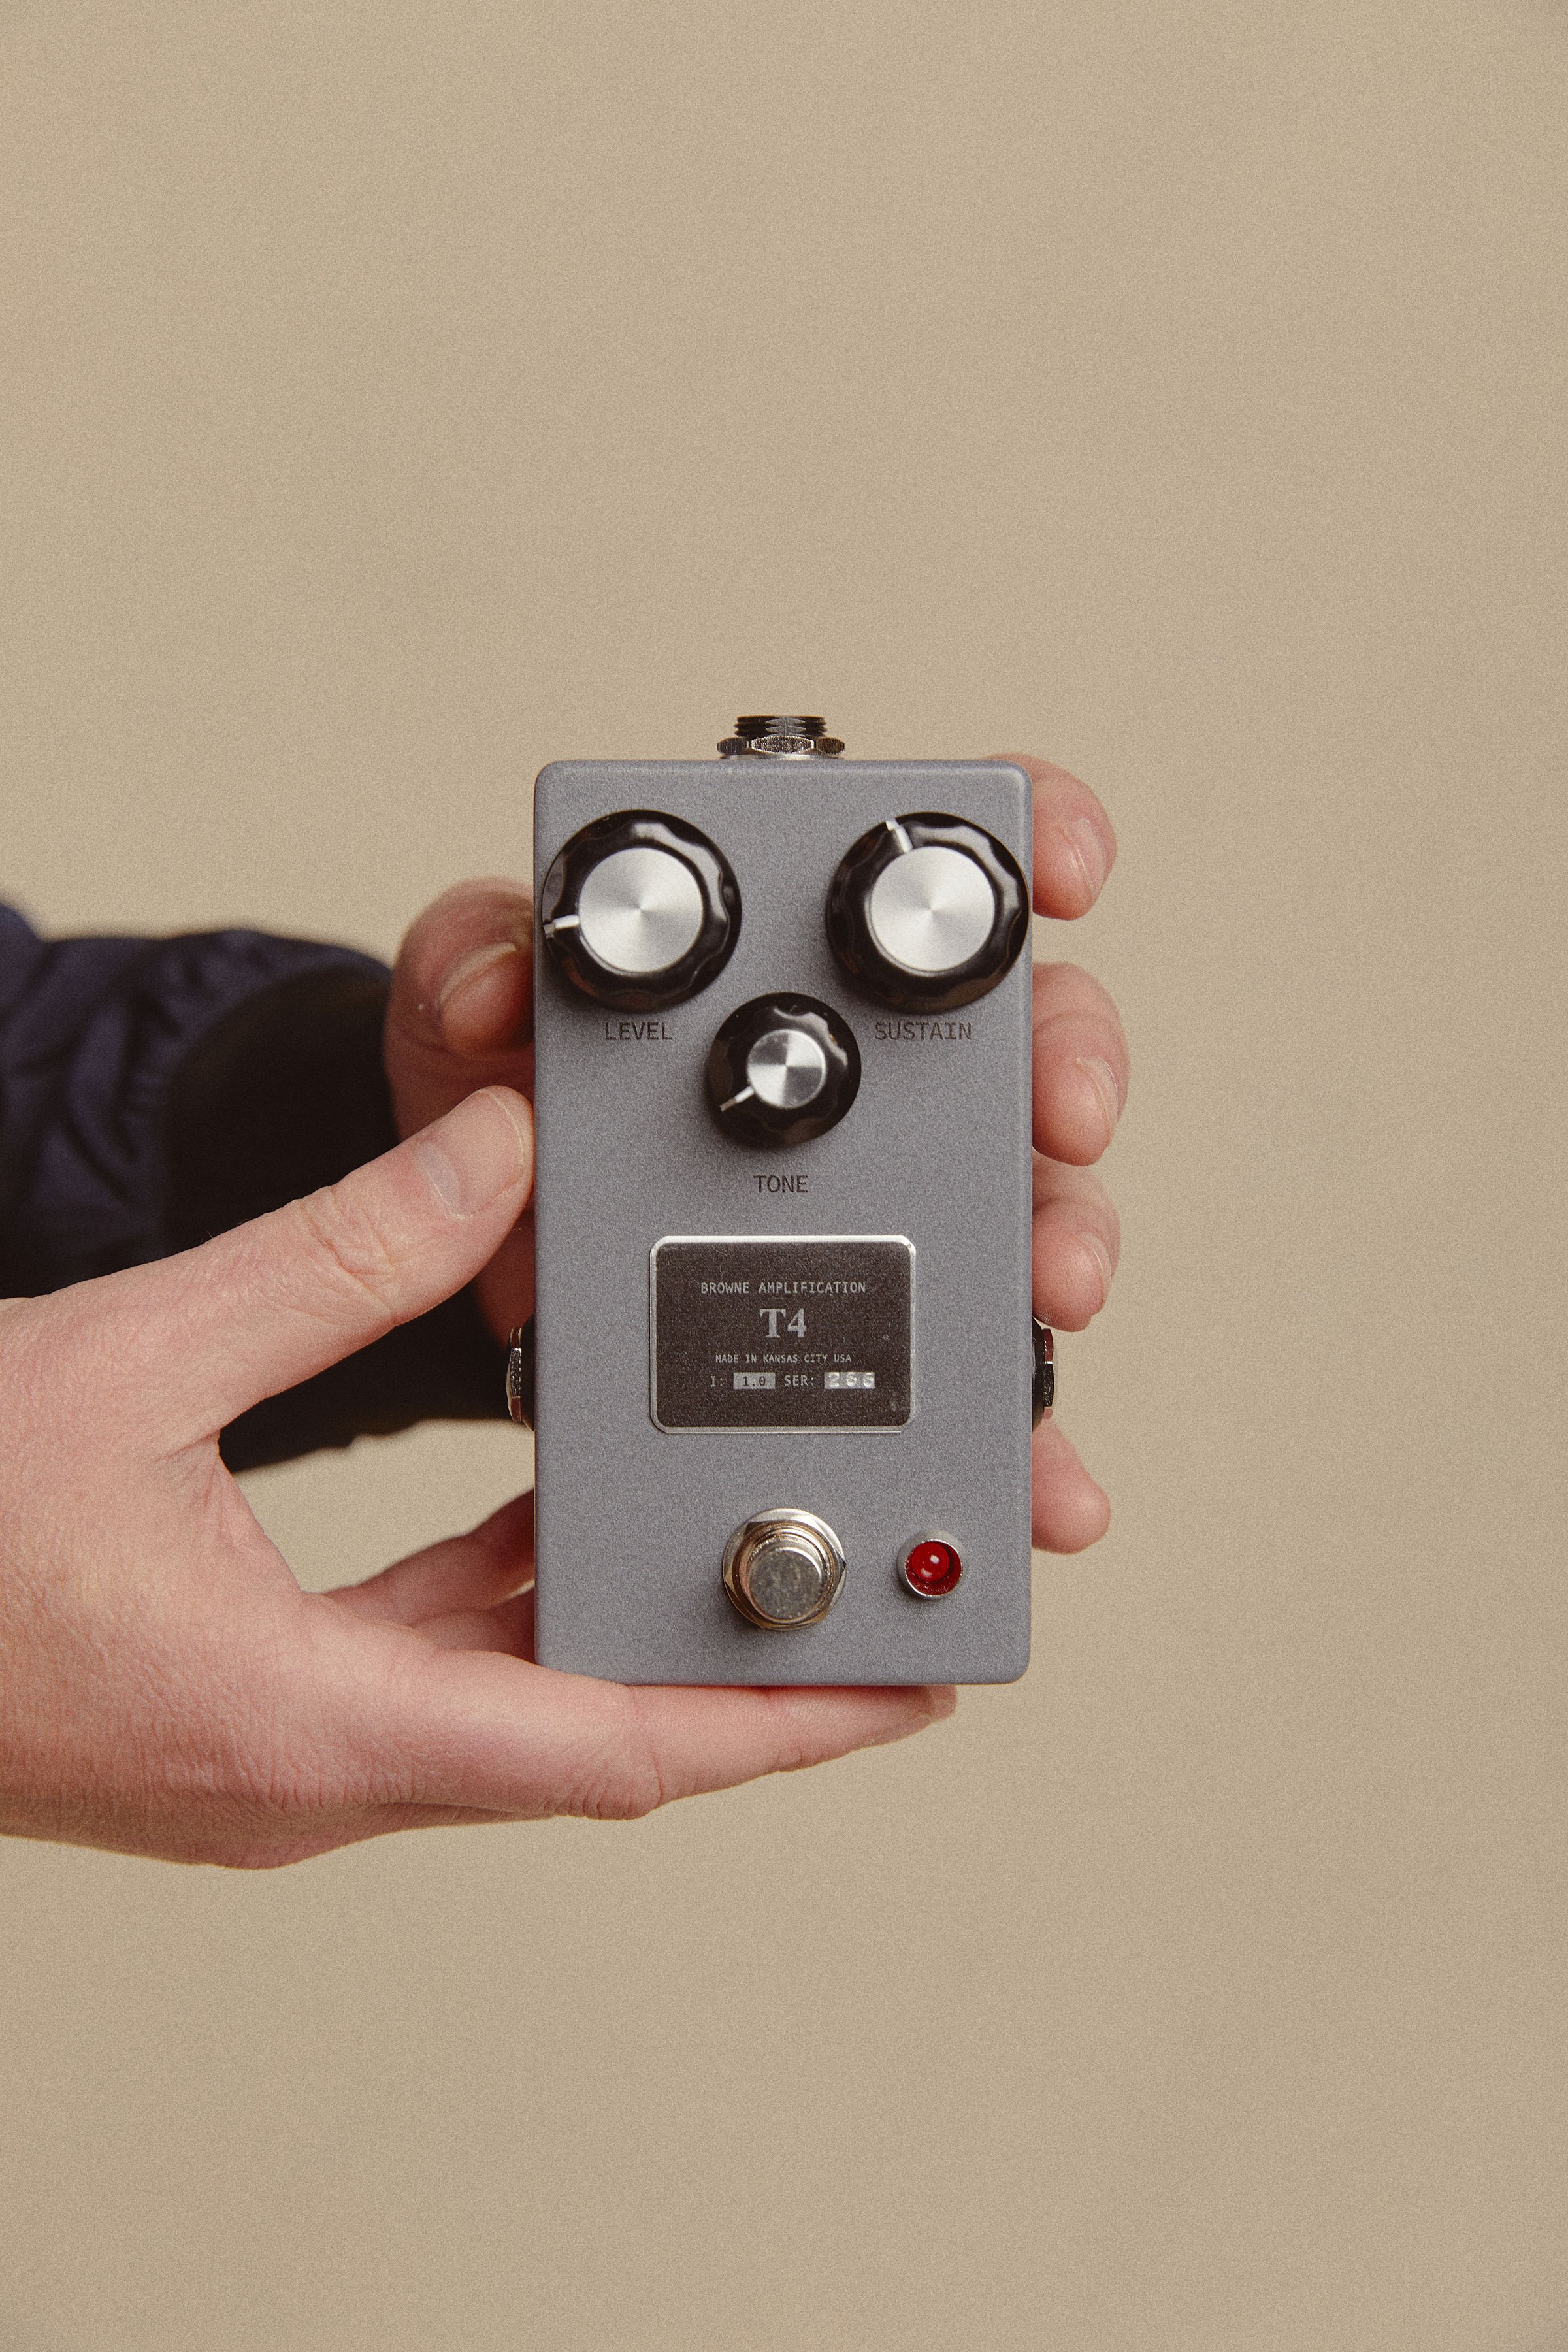 The T4 Fuzz — Browne Amplification